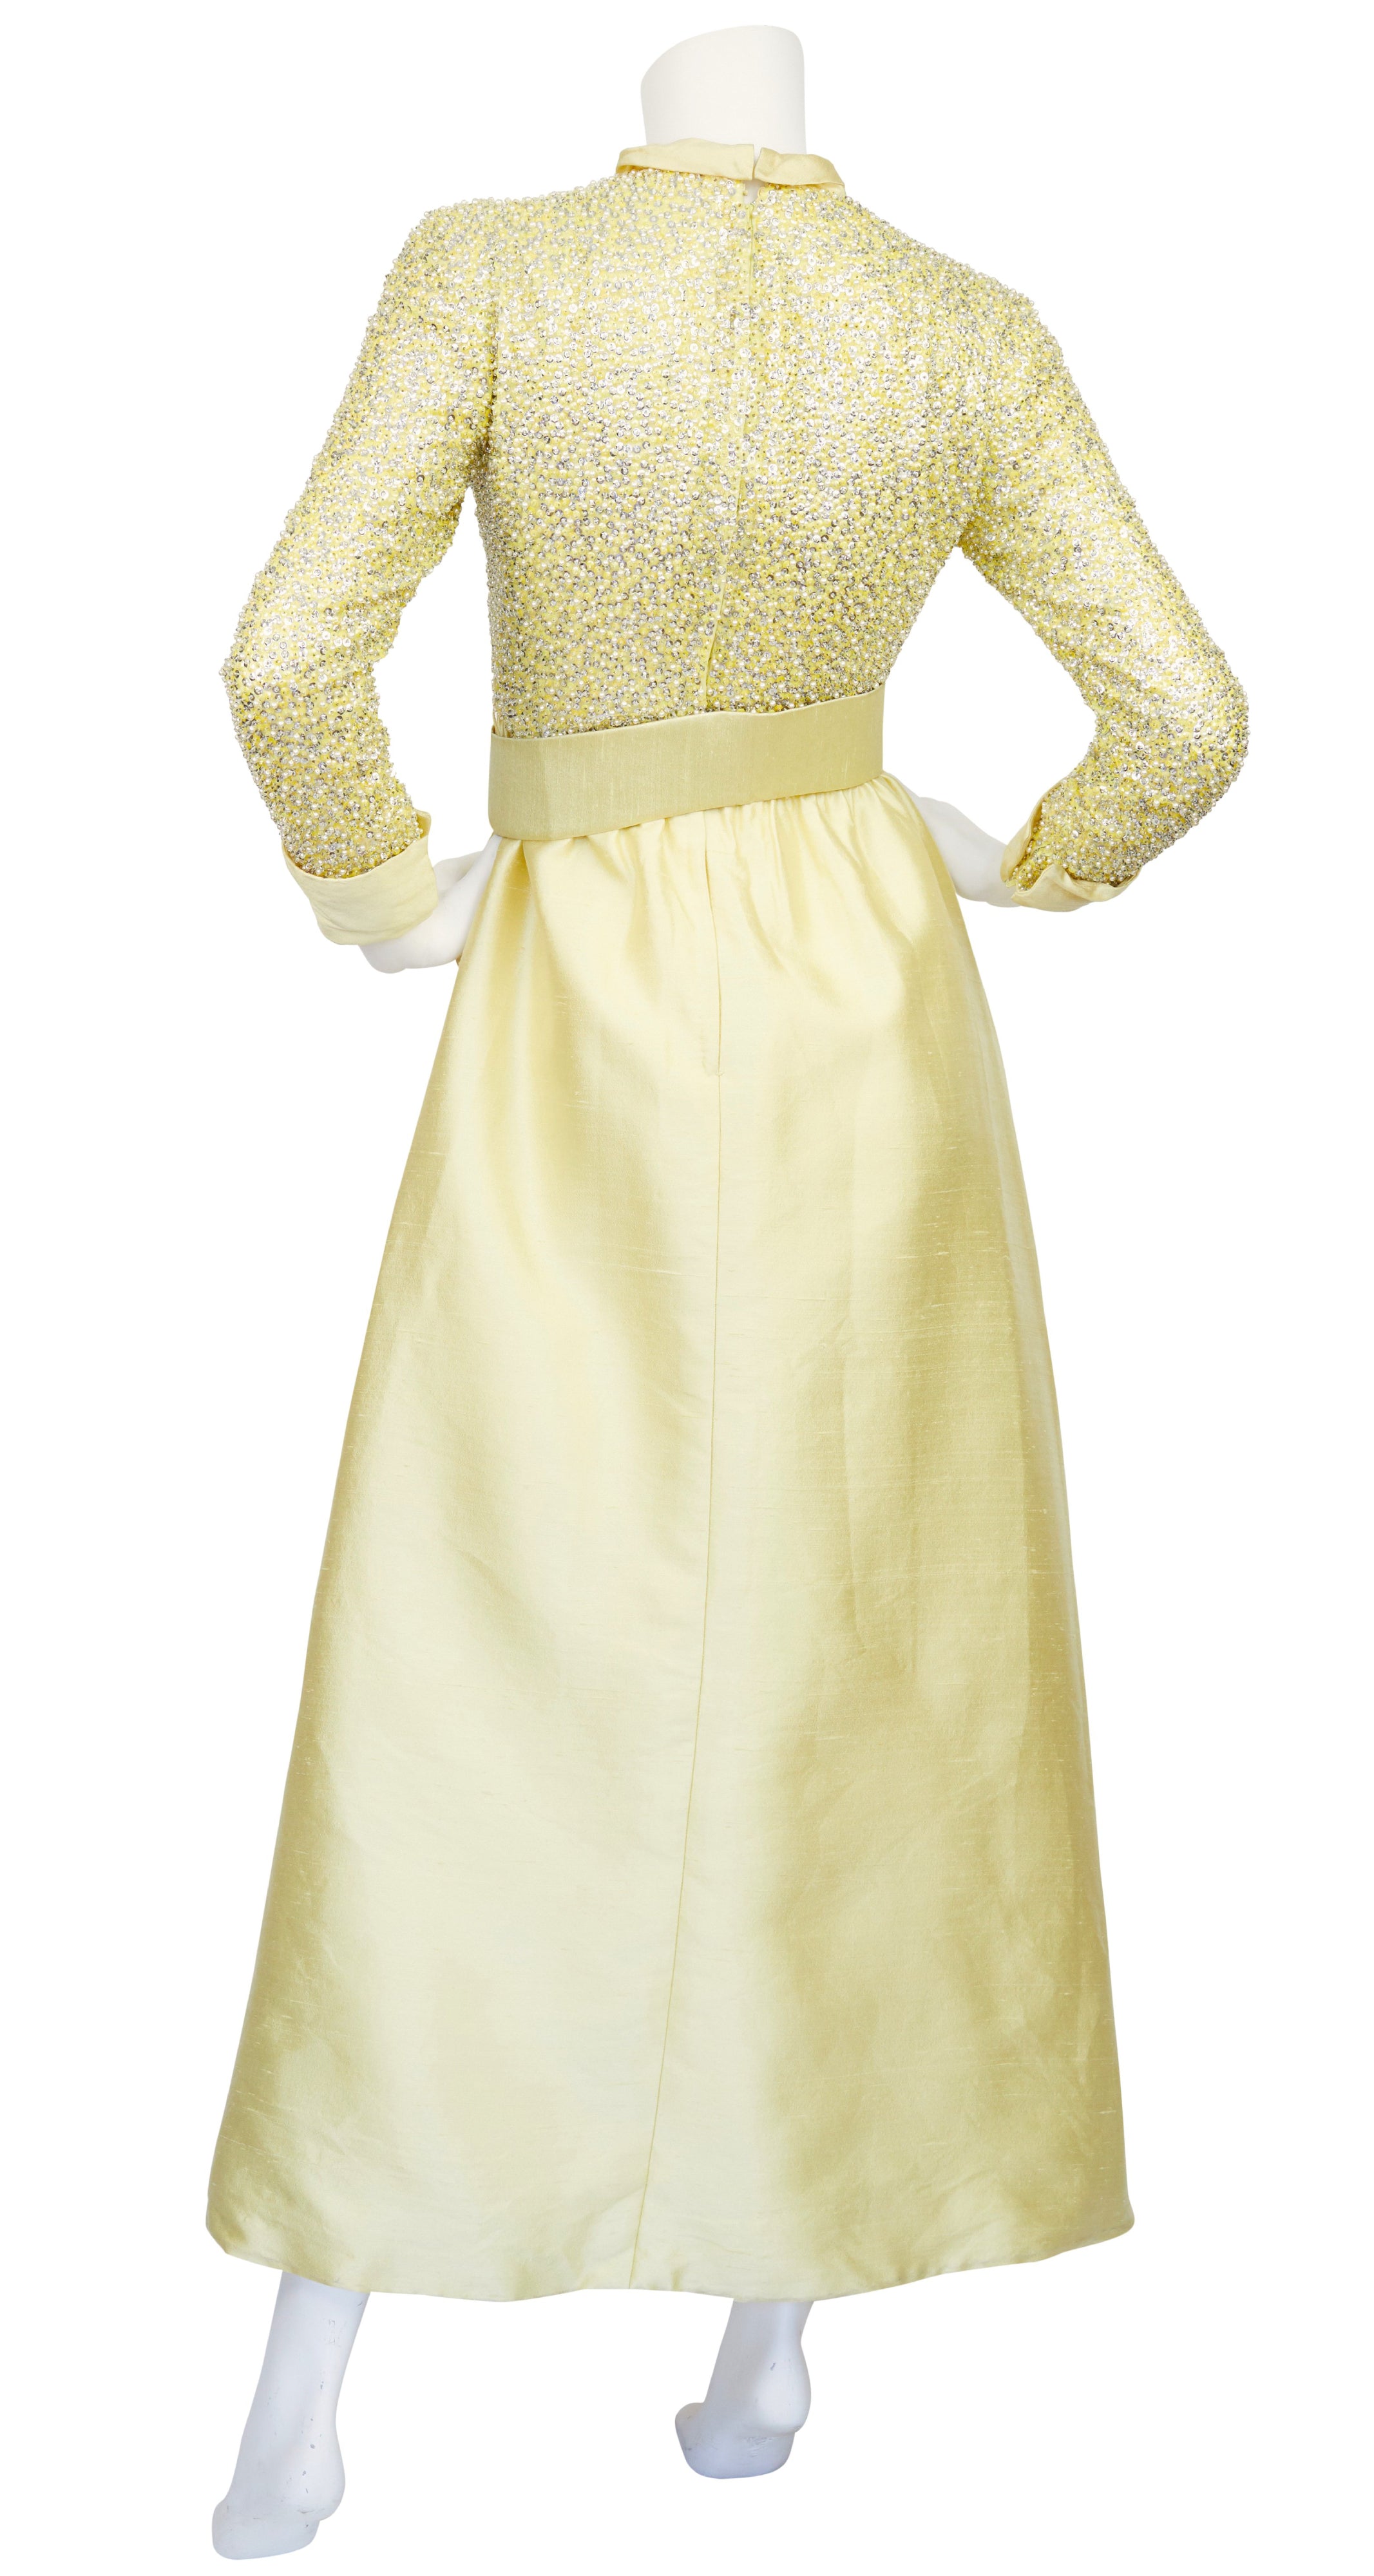 1960s Beaded Yellow Raw Silk Evening Gown